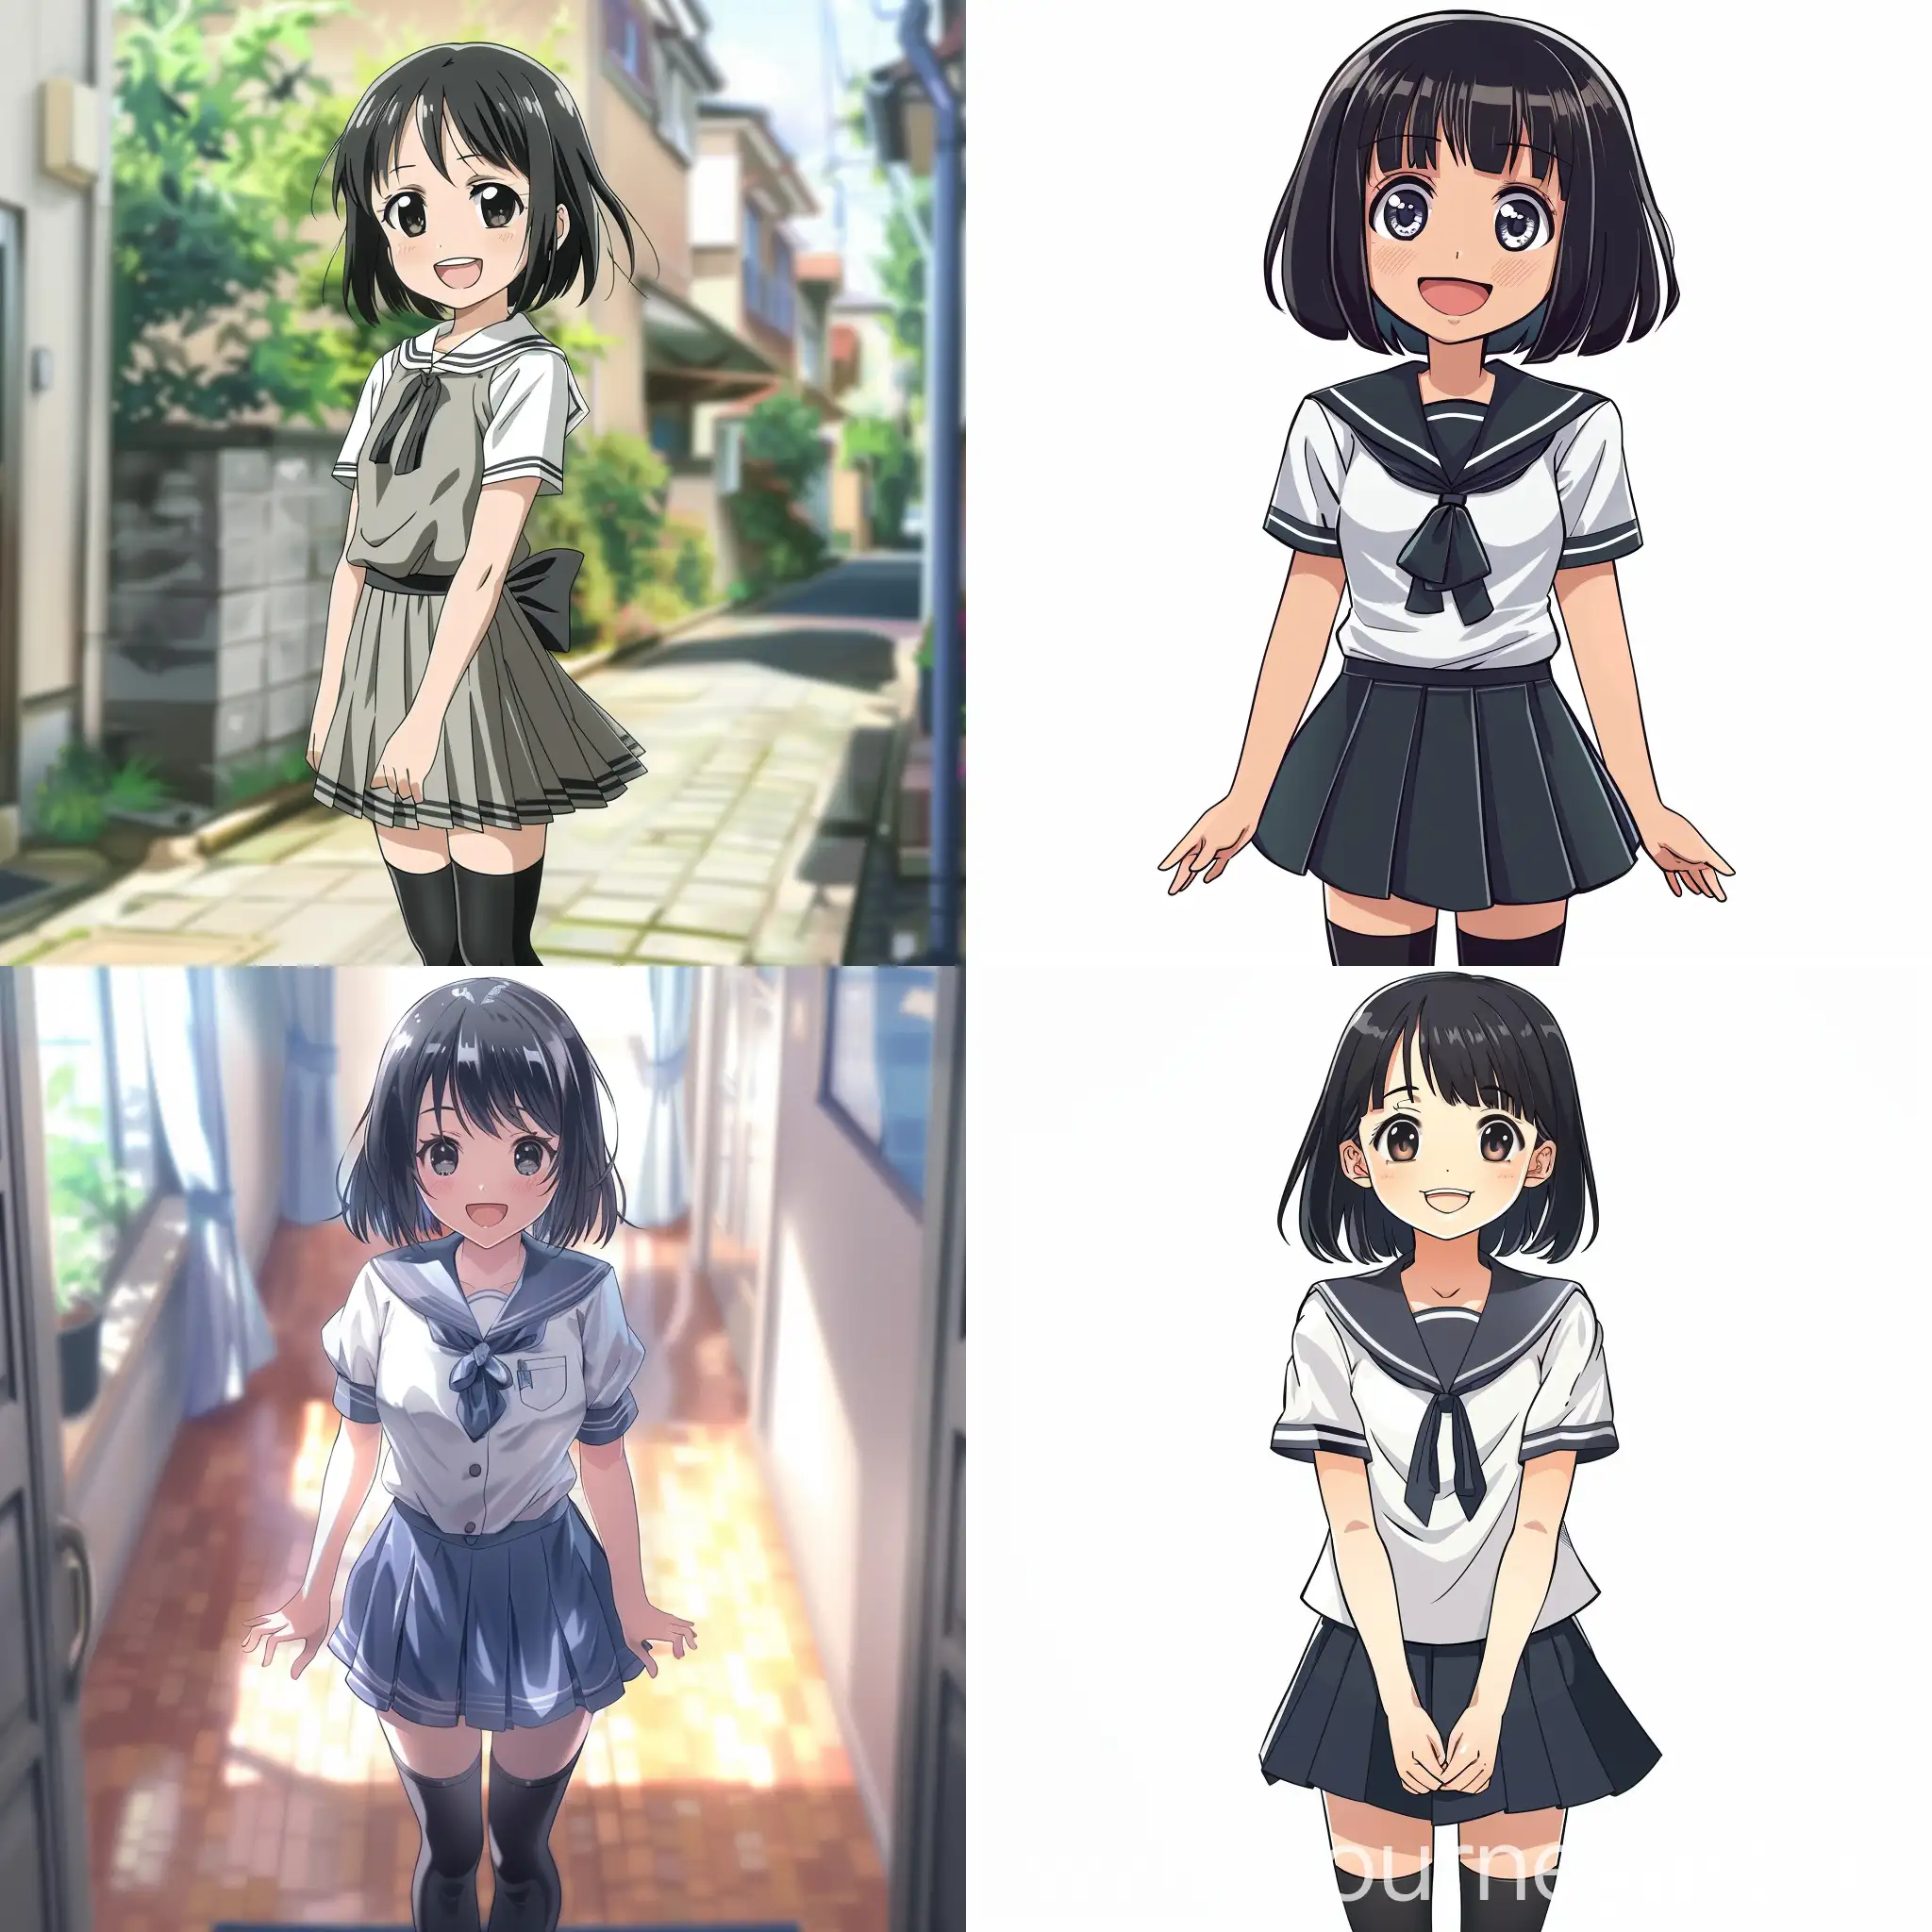 A cute smiling young Japanese girl with dark haircut, school uniform dress and black stocking in anime style